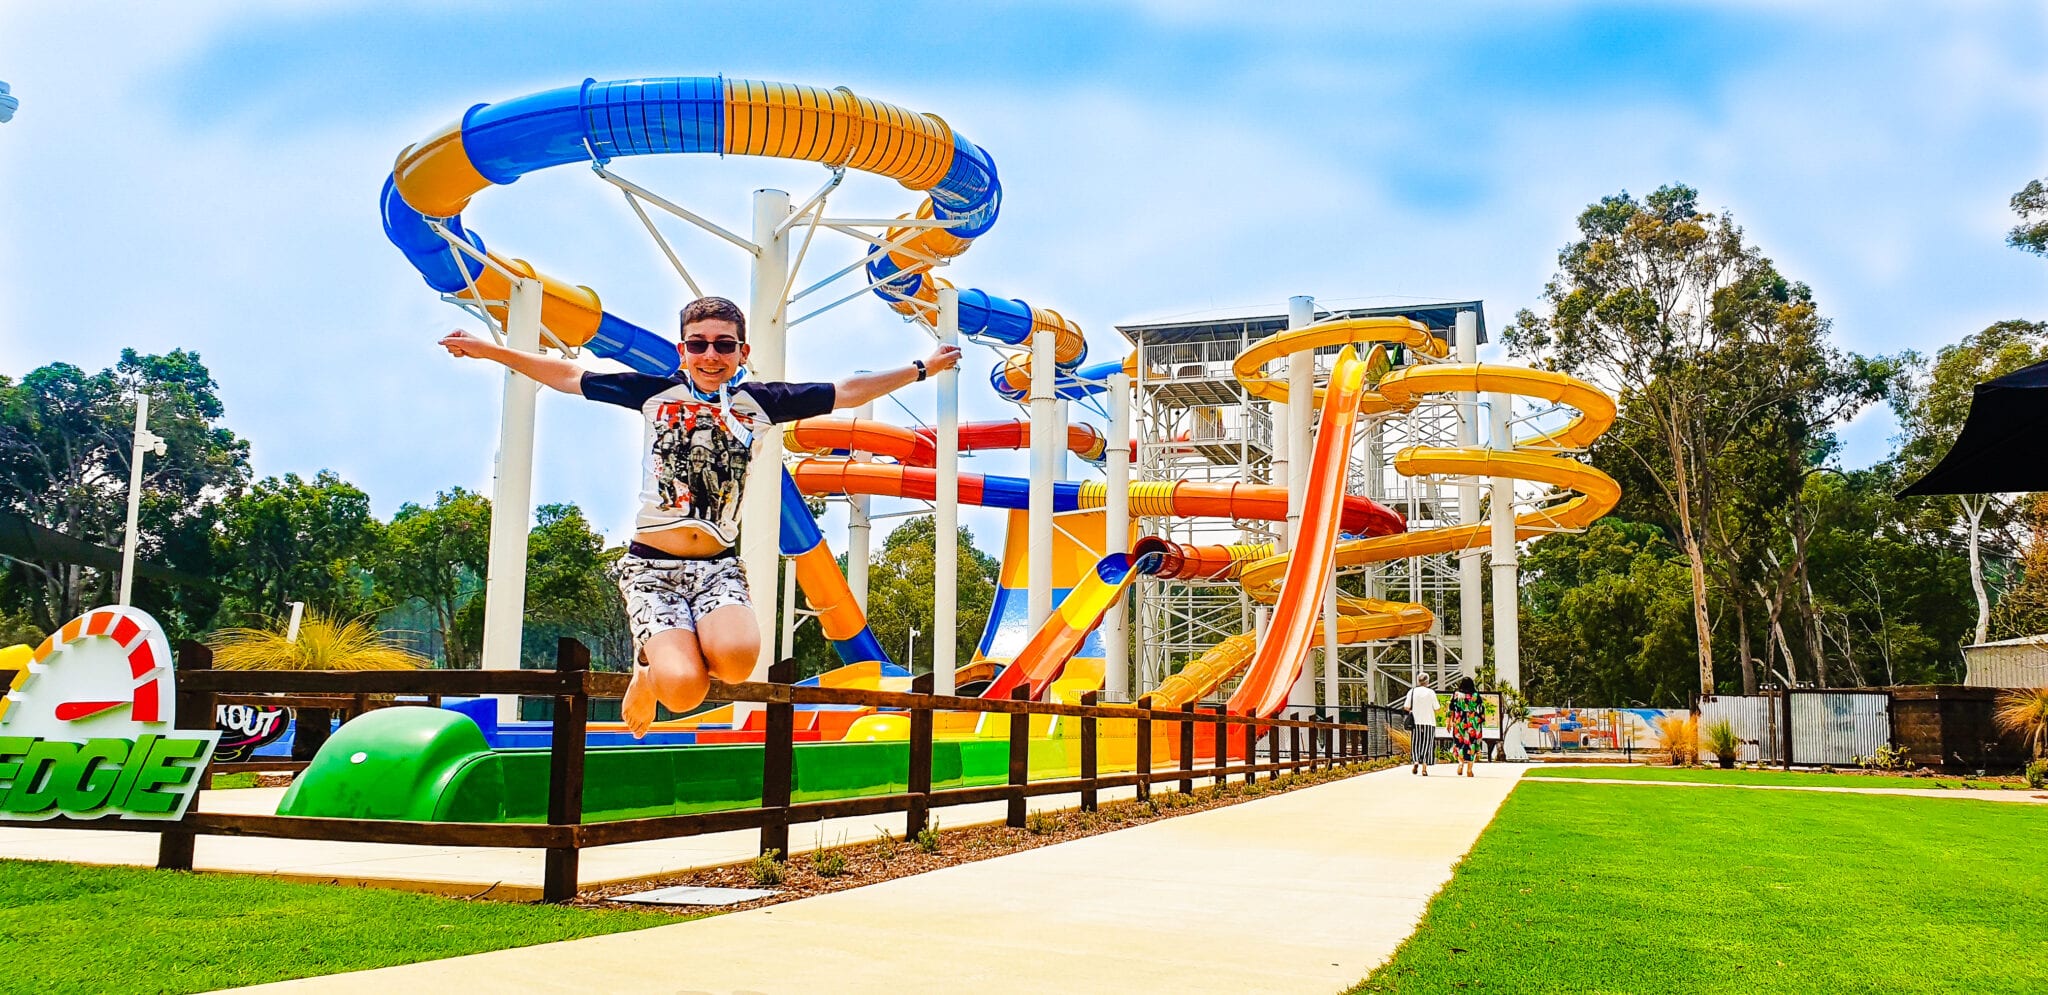 water-slides-the-buggybuddys-online-guide-for-families-in-perth